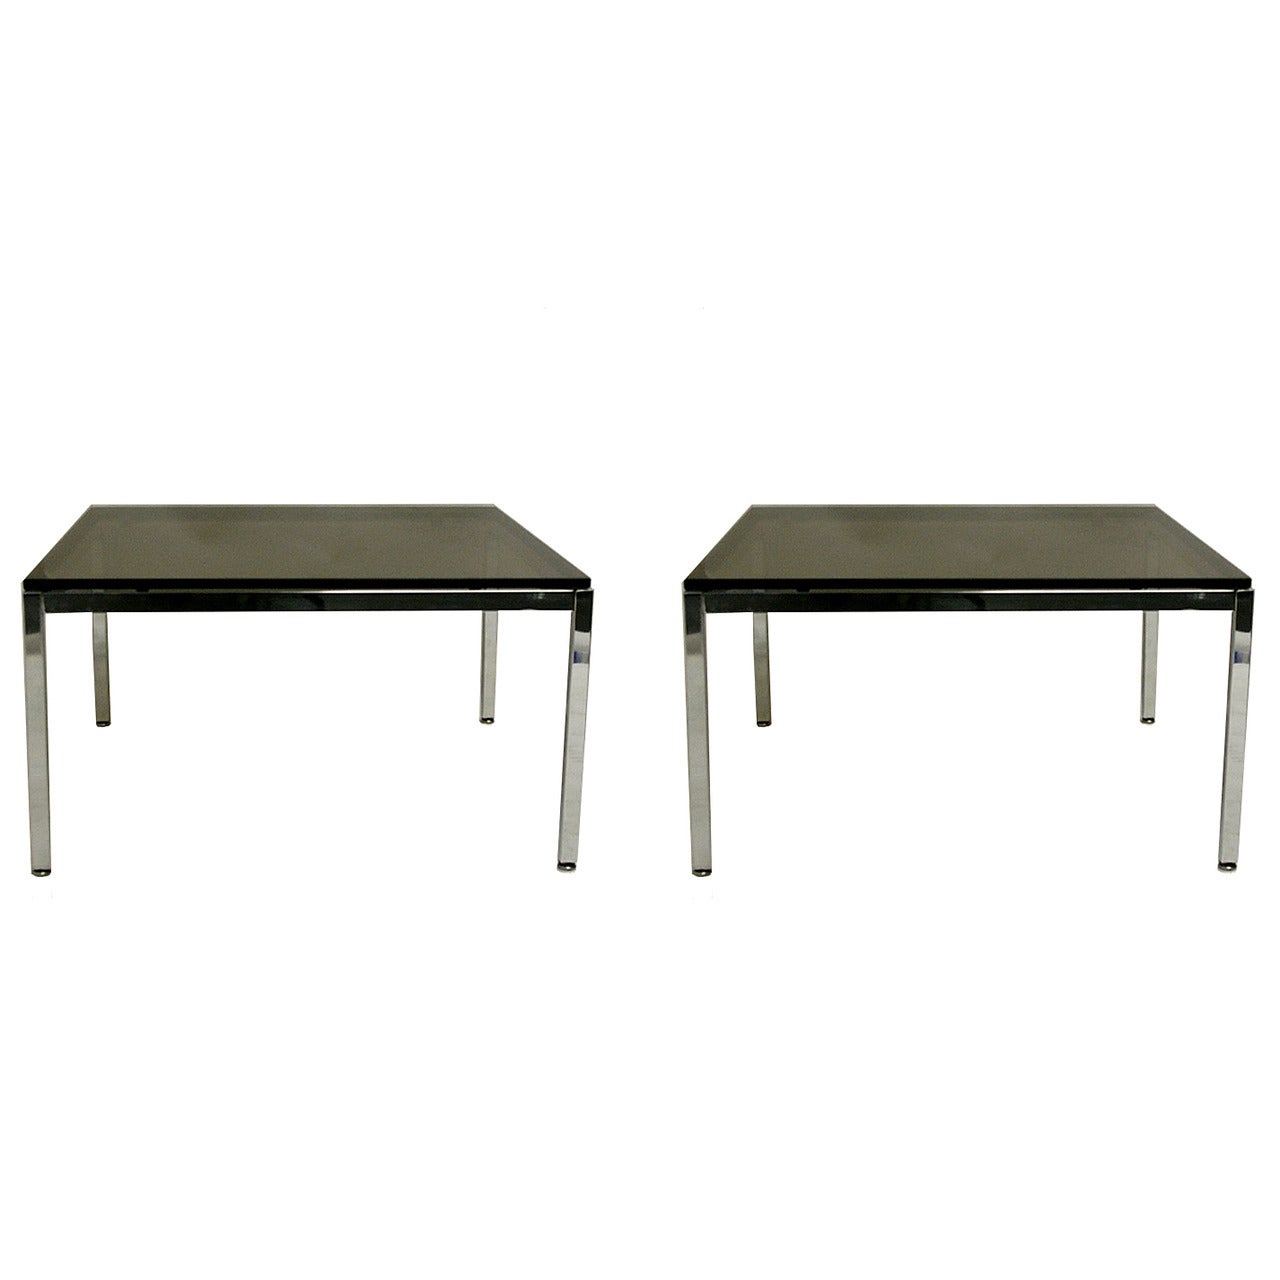 Pair of Sleek Smoked Glass and Chrome End Tables by Steelcase